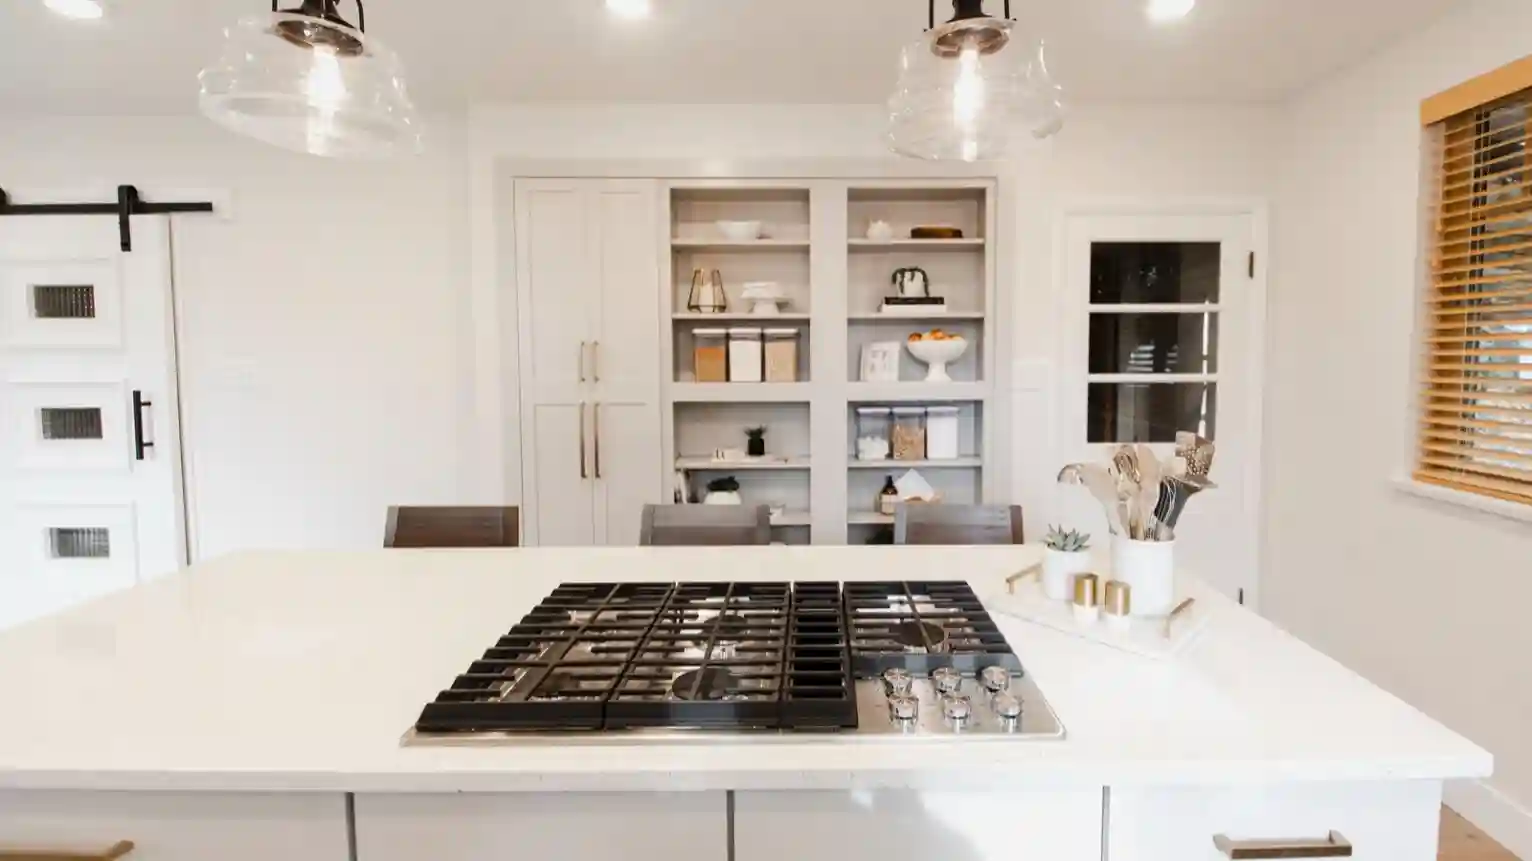 An all white kitchen with built in shelving and cabinets on the backwall. 